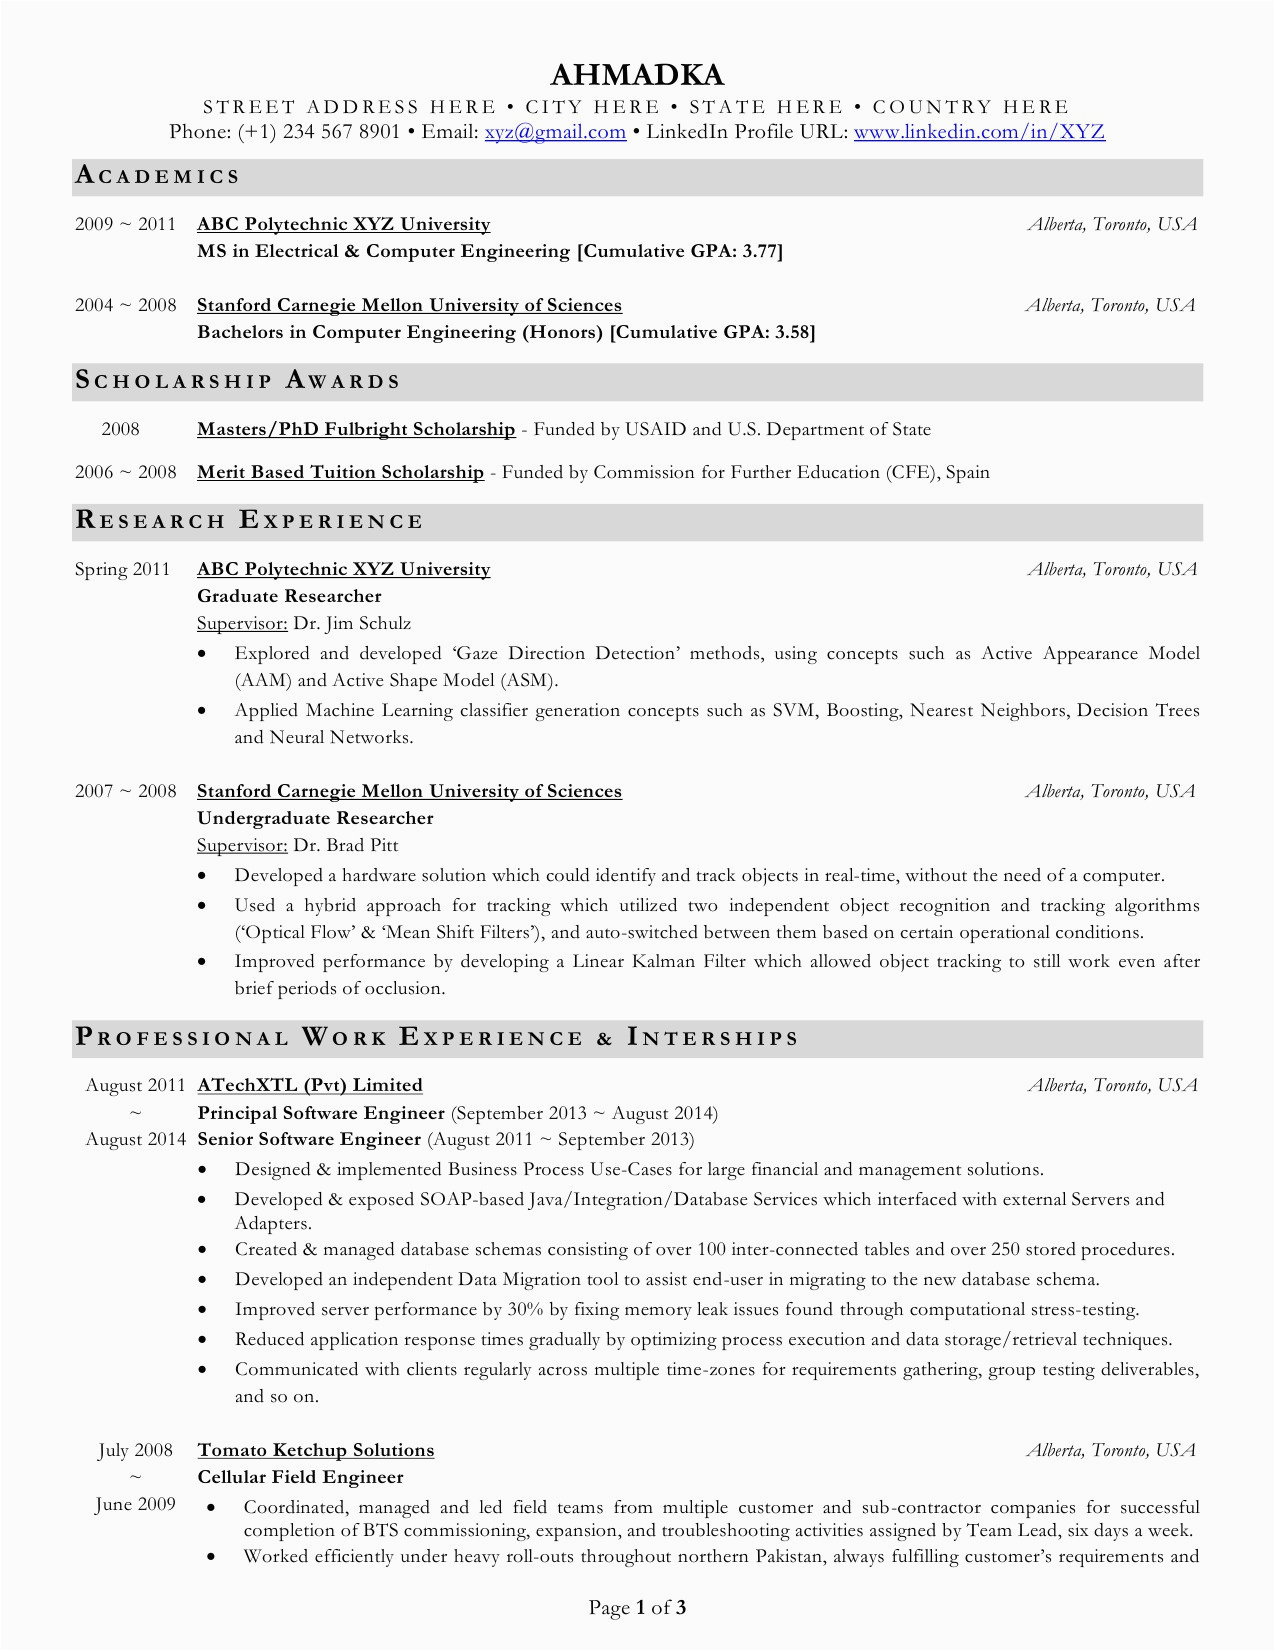 is my cv okay for uploading with cs masters applications